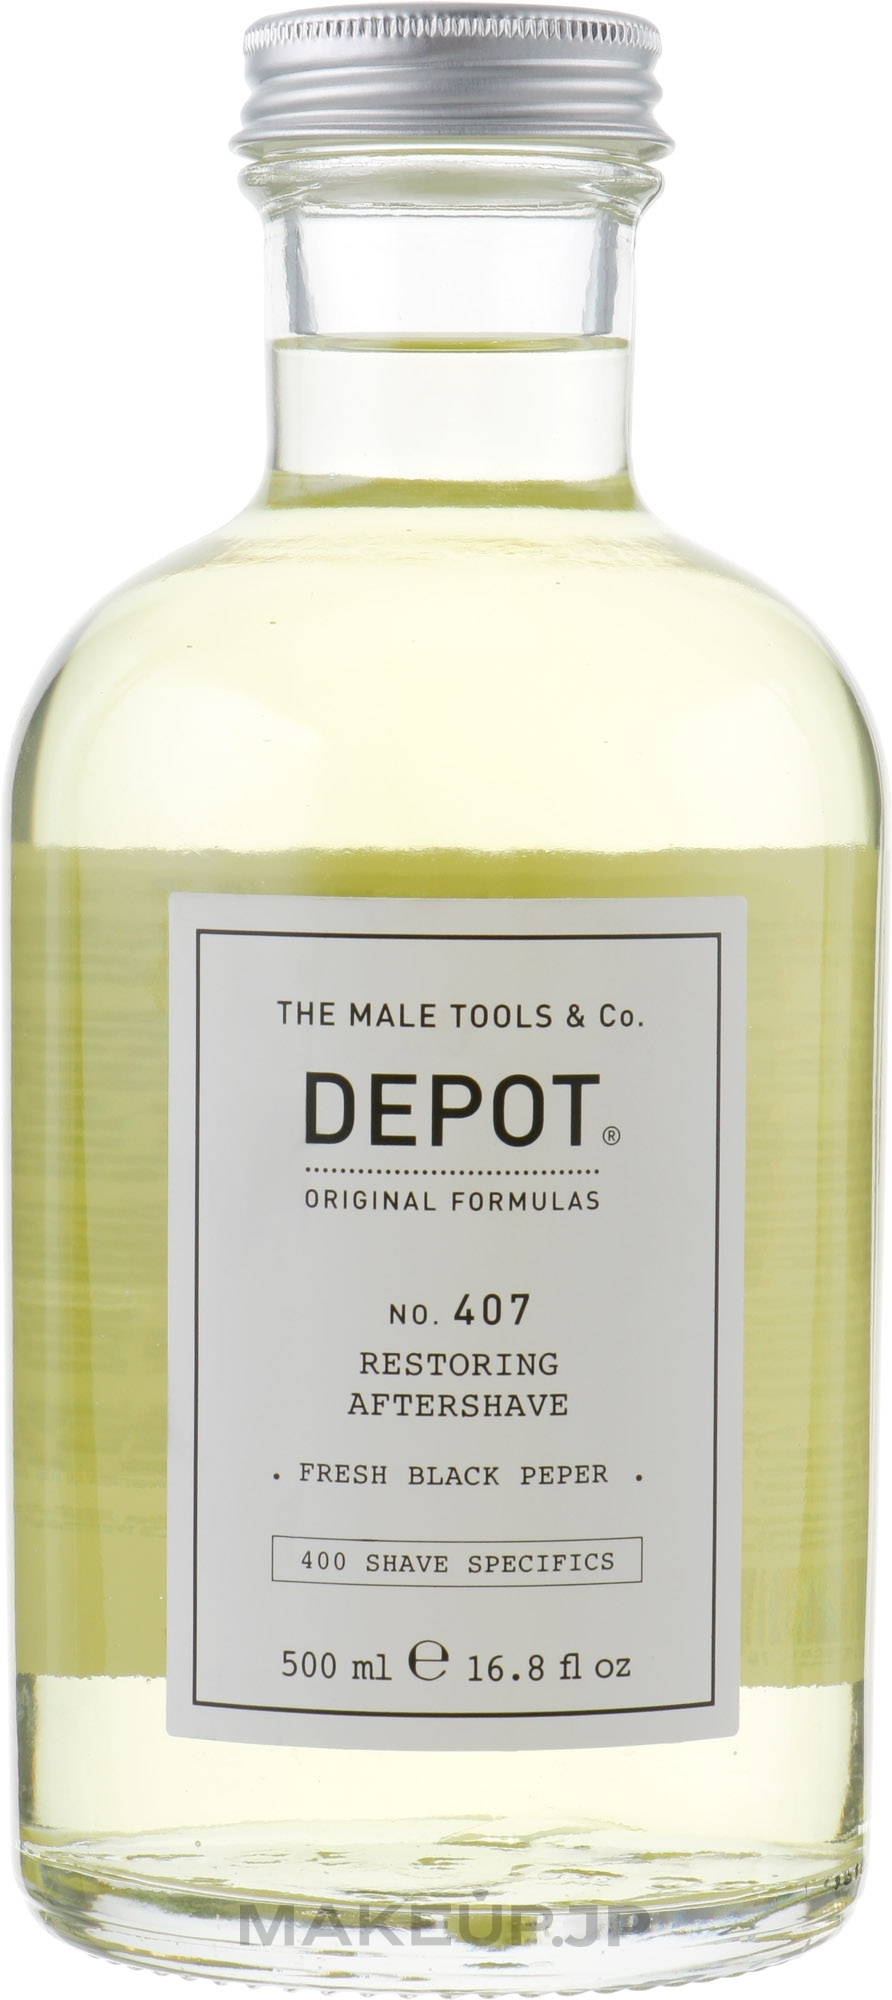 Repairing & Refreshing After Shave Lotion - Depot Shave Specifics 407 Restoring Aftershave — photo 500 ml